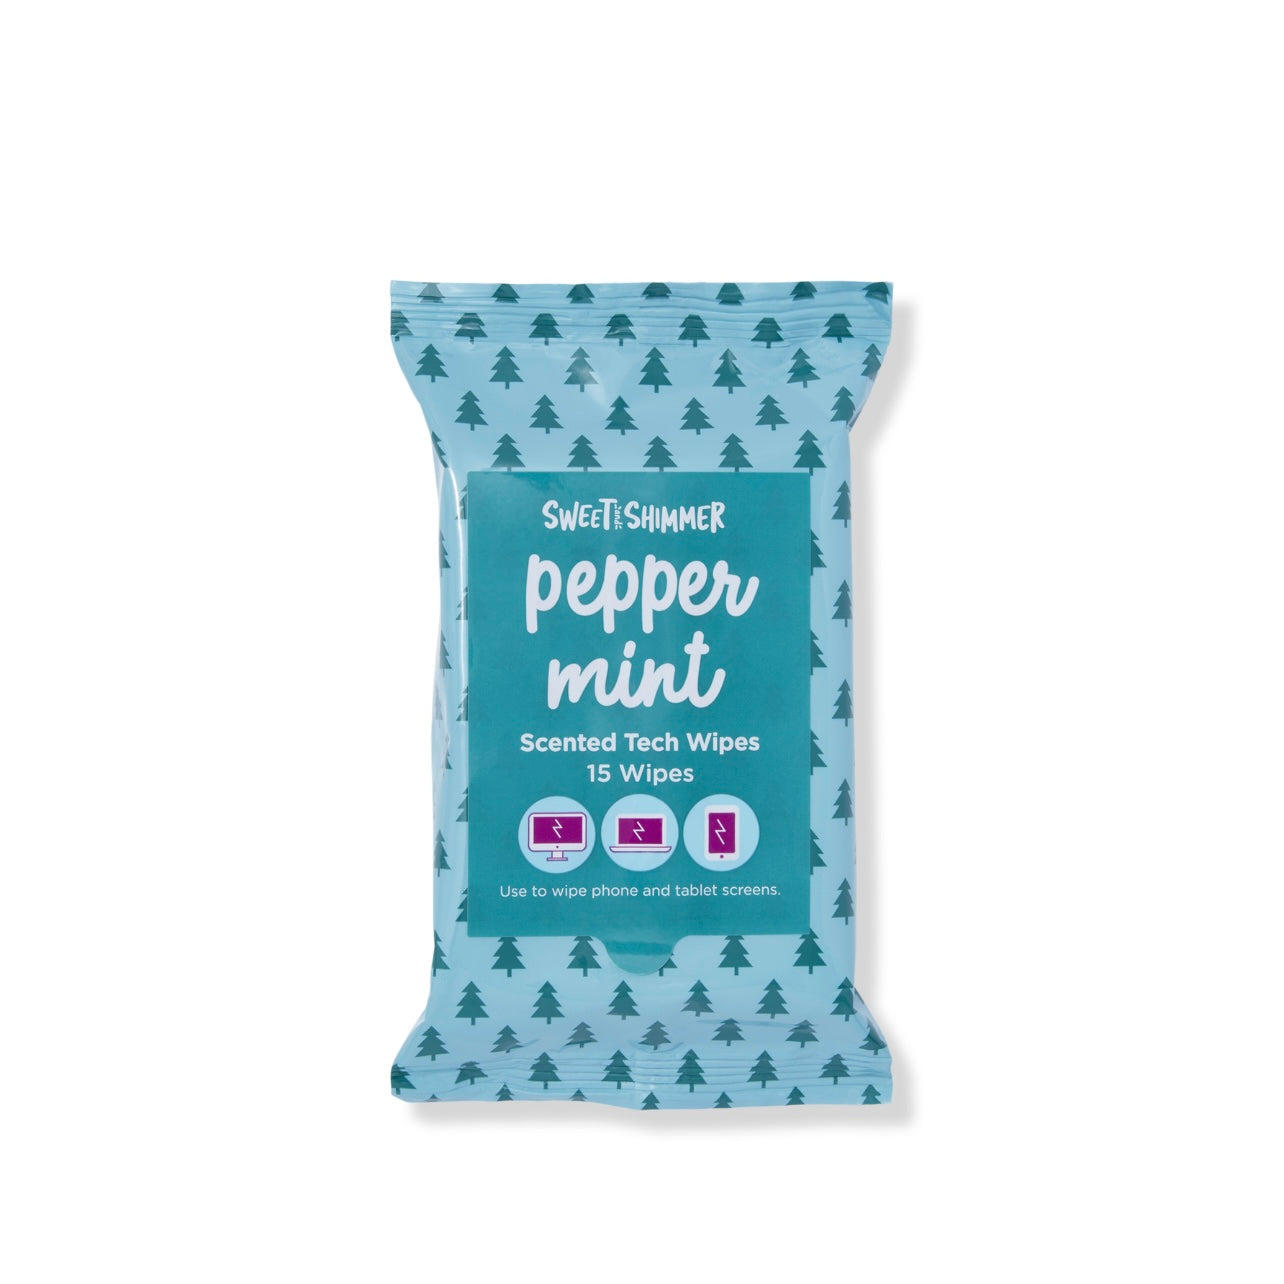 Peppermint scented tech wipes